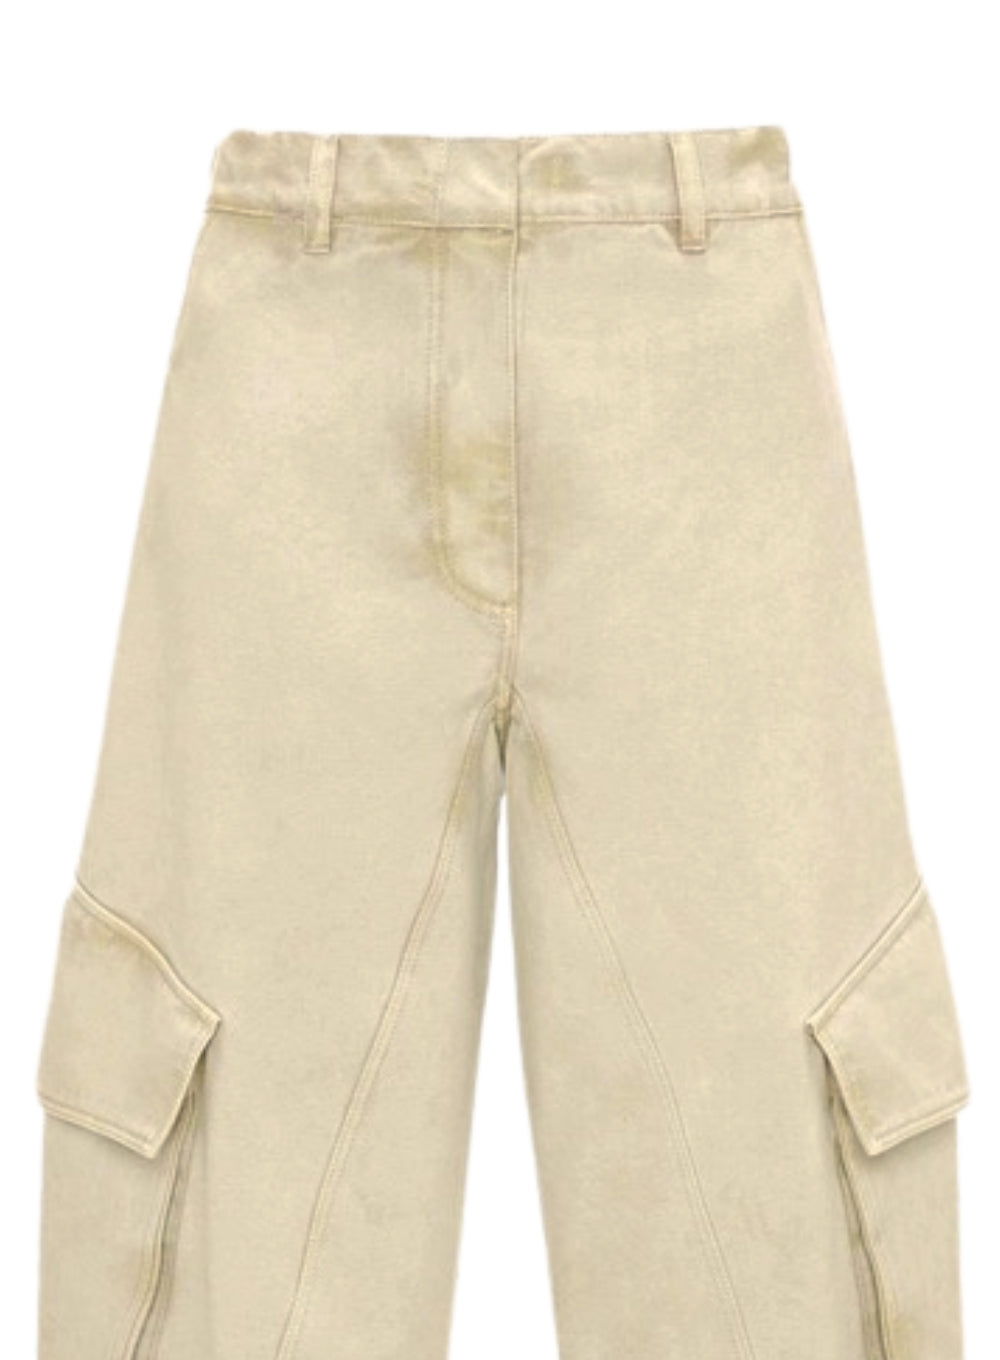 J.W. ANDERSON | Twisted Cargo Trouser